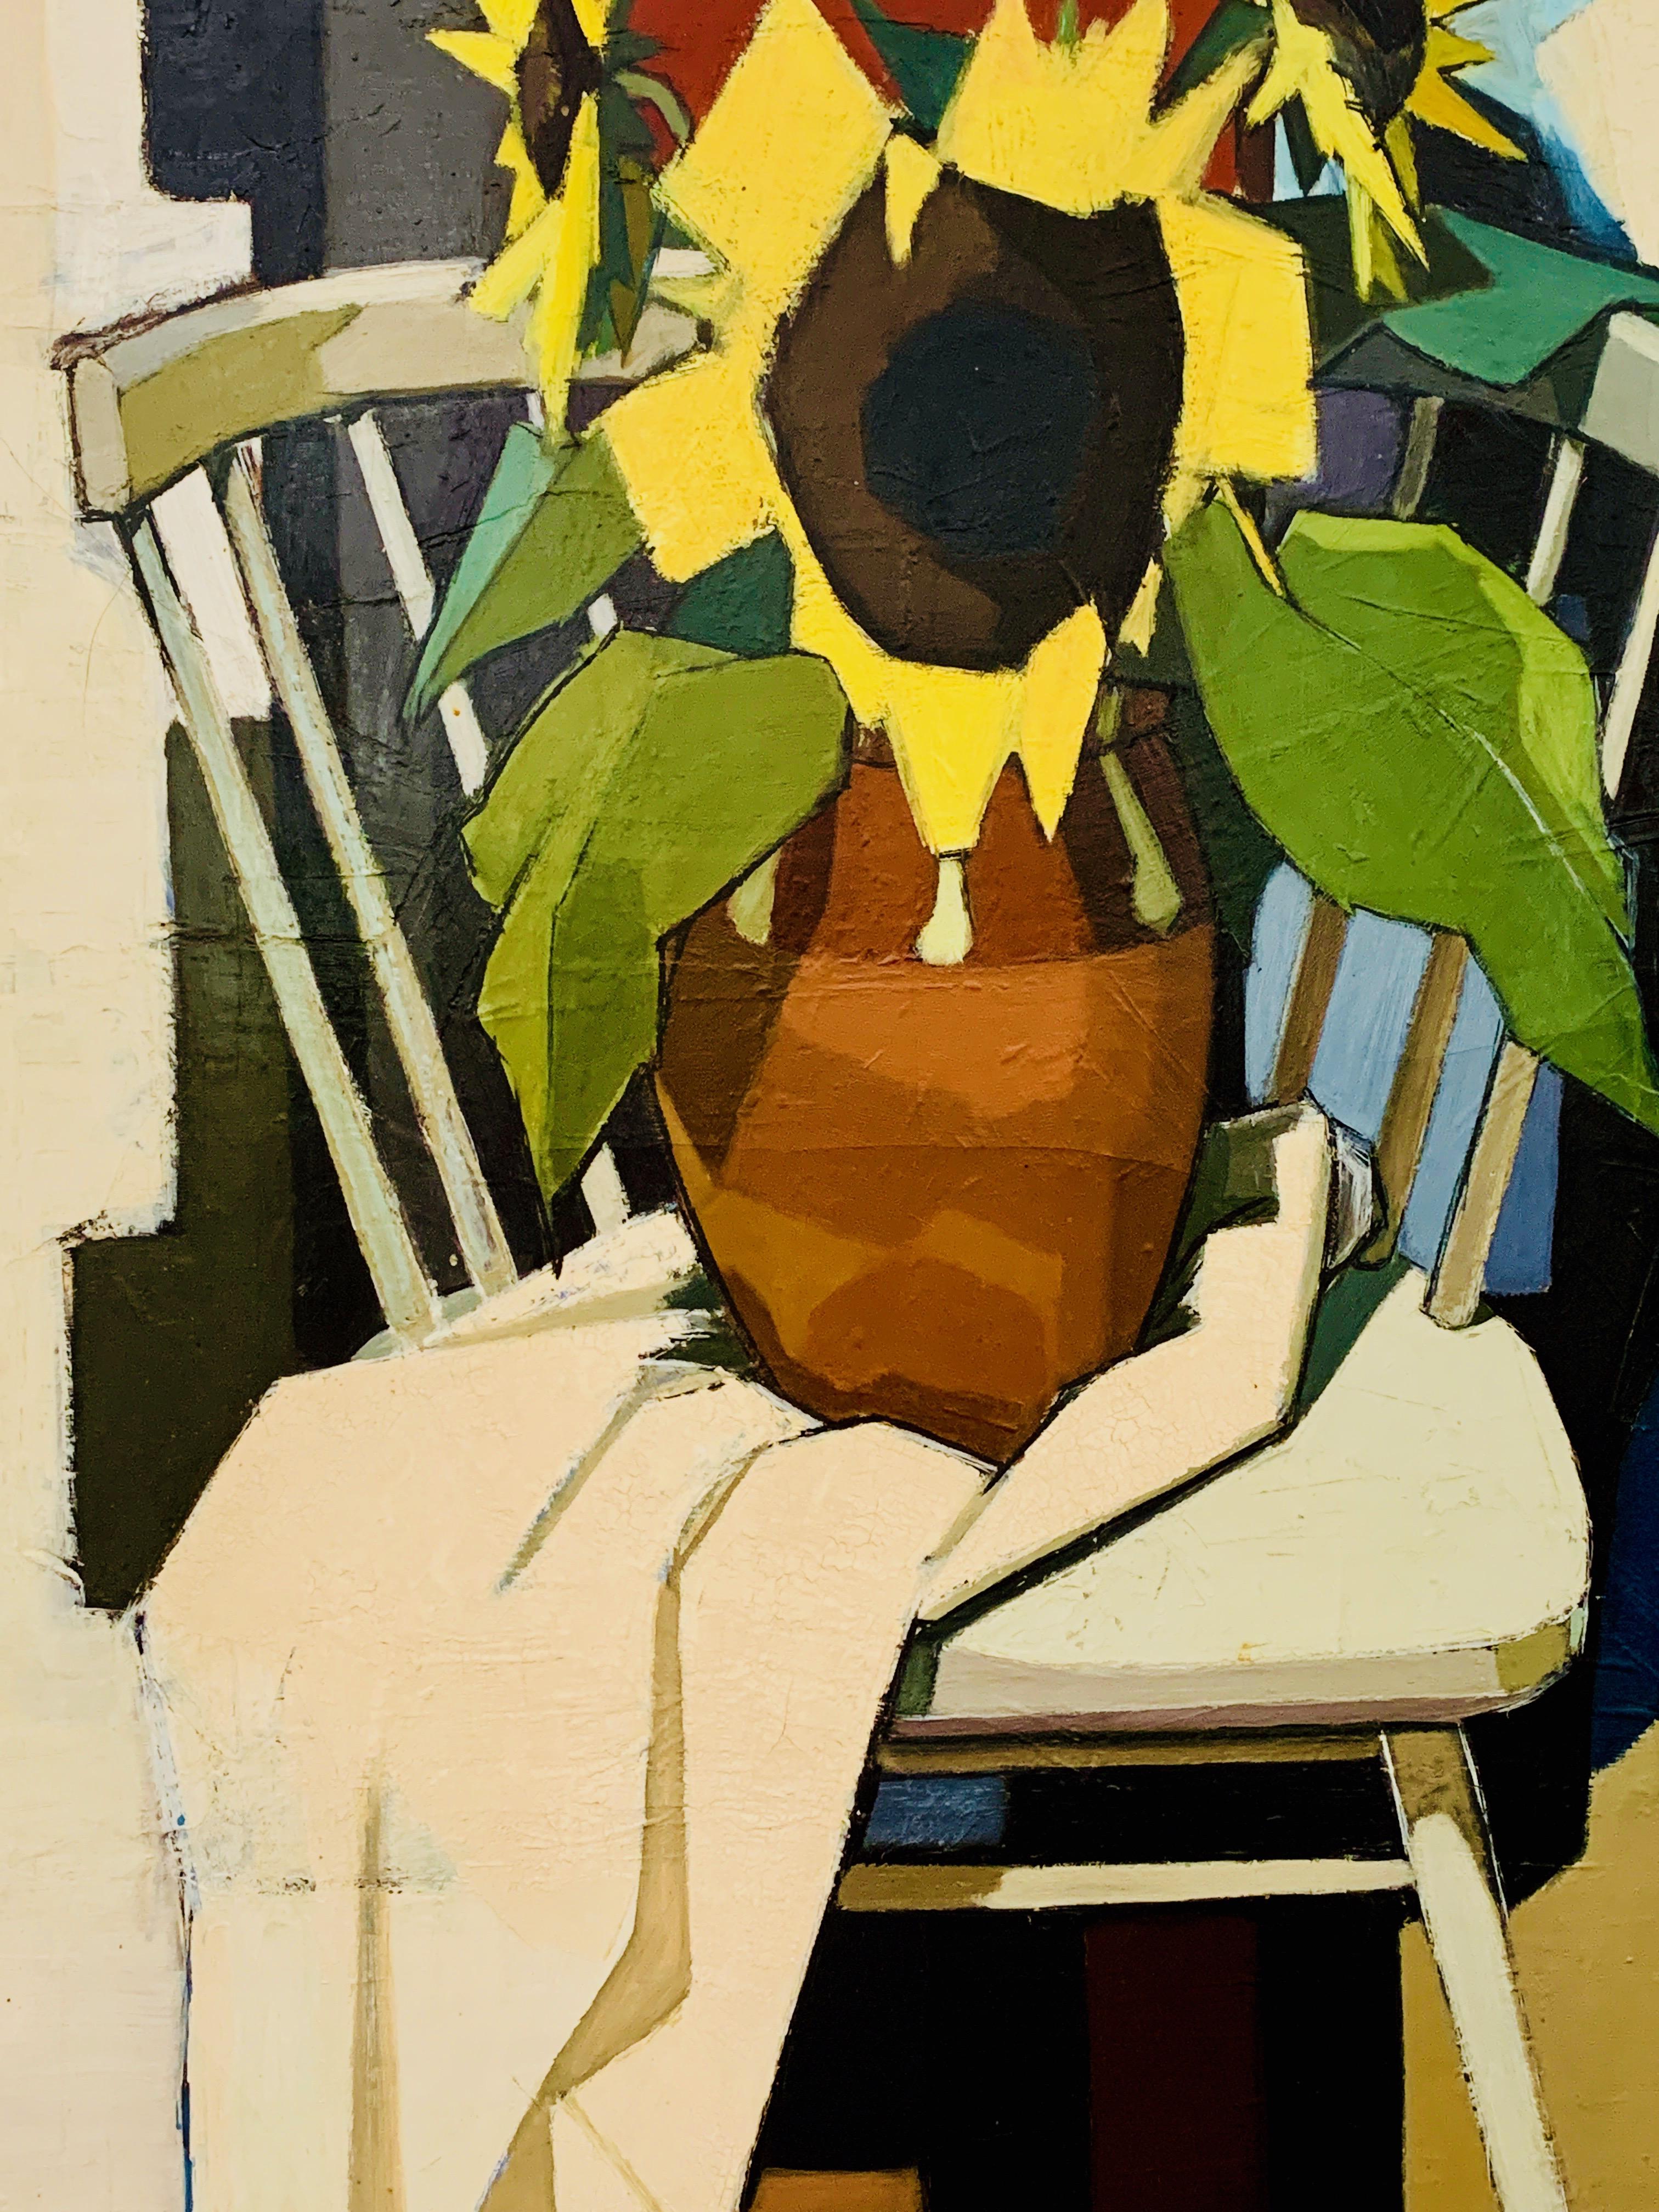 Modernist 1950's mid century still life of Sunflowers in an interior - Painting by Edmond Lund